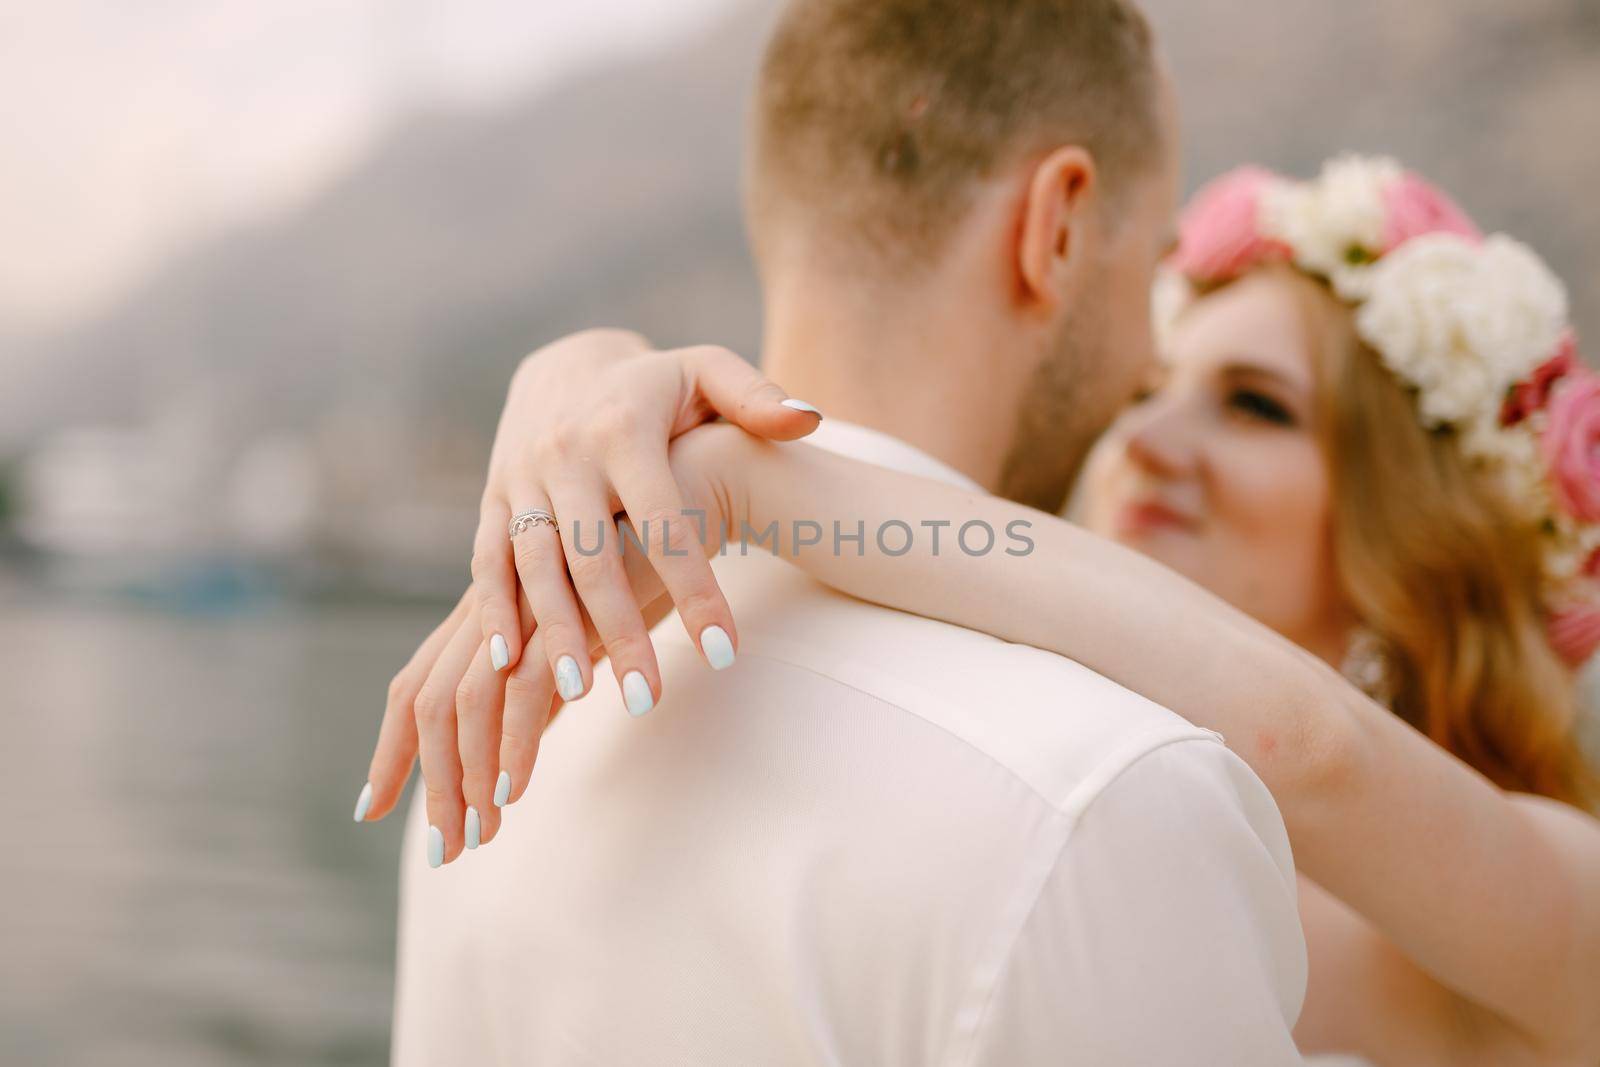 The bride and groom hug on the pier, the bride in a delicate wreath wrapped her arms around the groom's neck. High quality photo